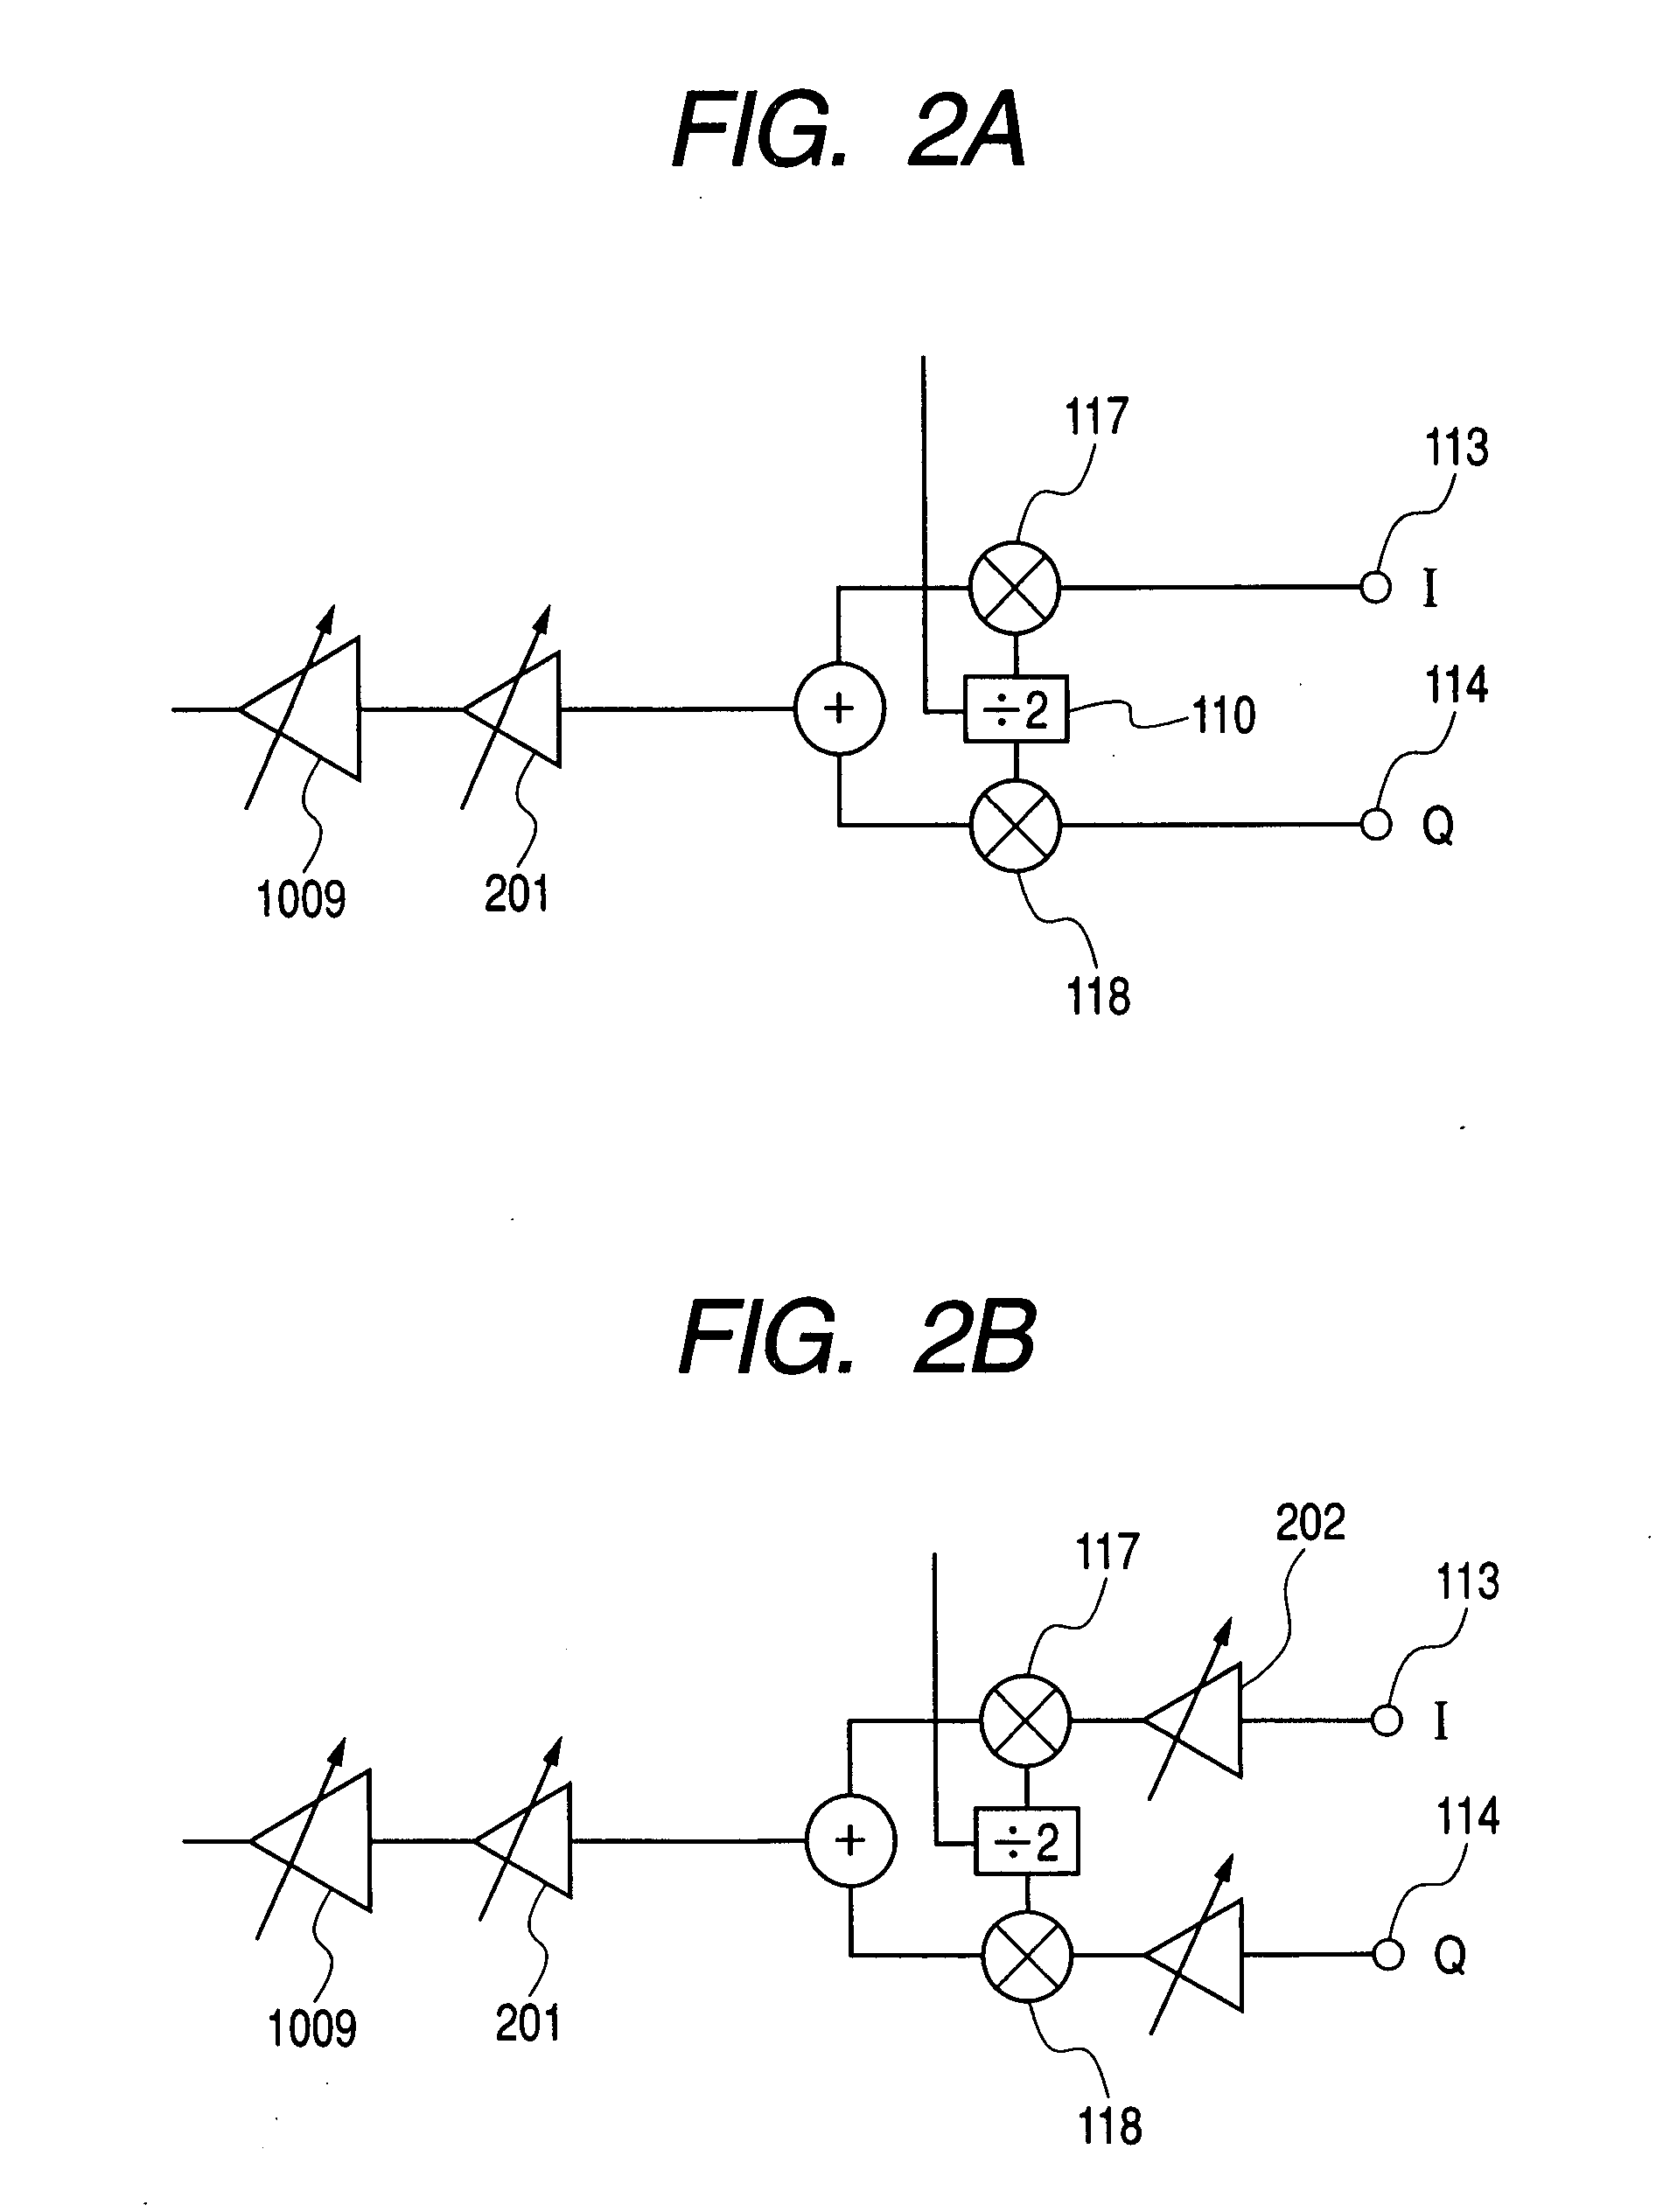 Direct-conversion transmitter circuit and transceiver system